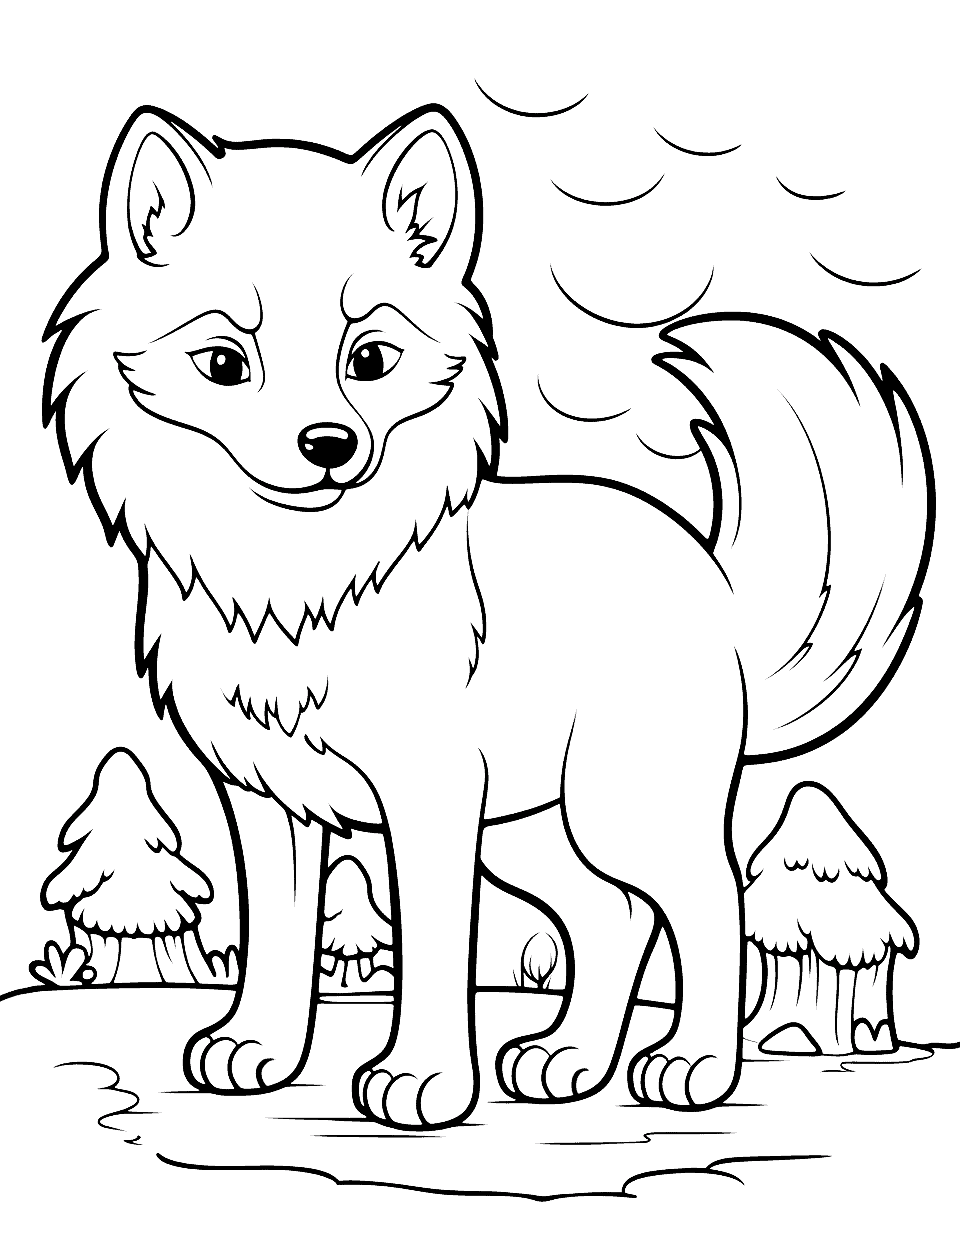 Chibi Wolf Adventures Coloring Page - A tiny chibi wolf exploring a big world.